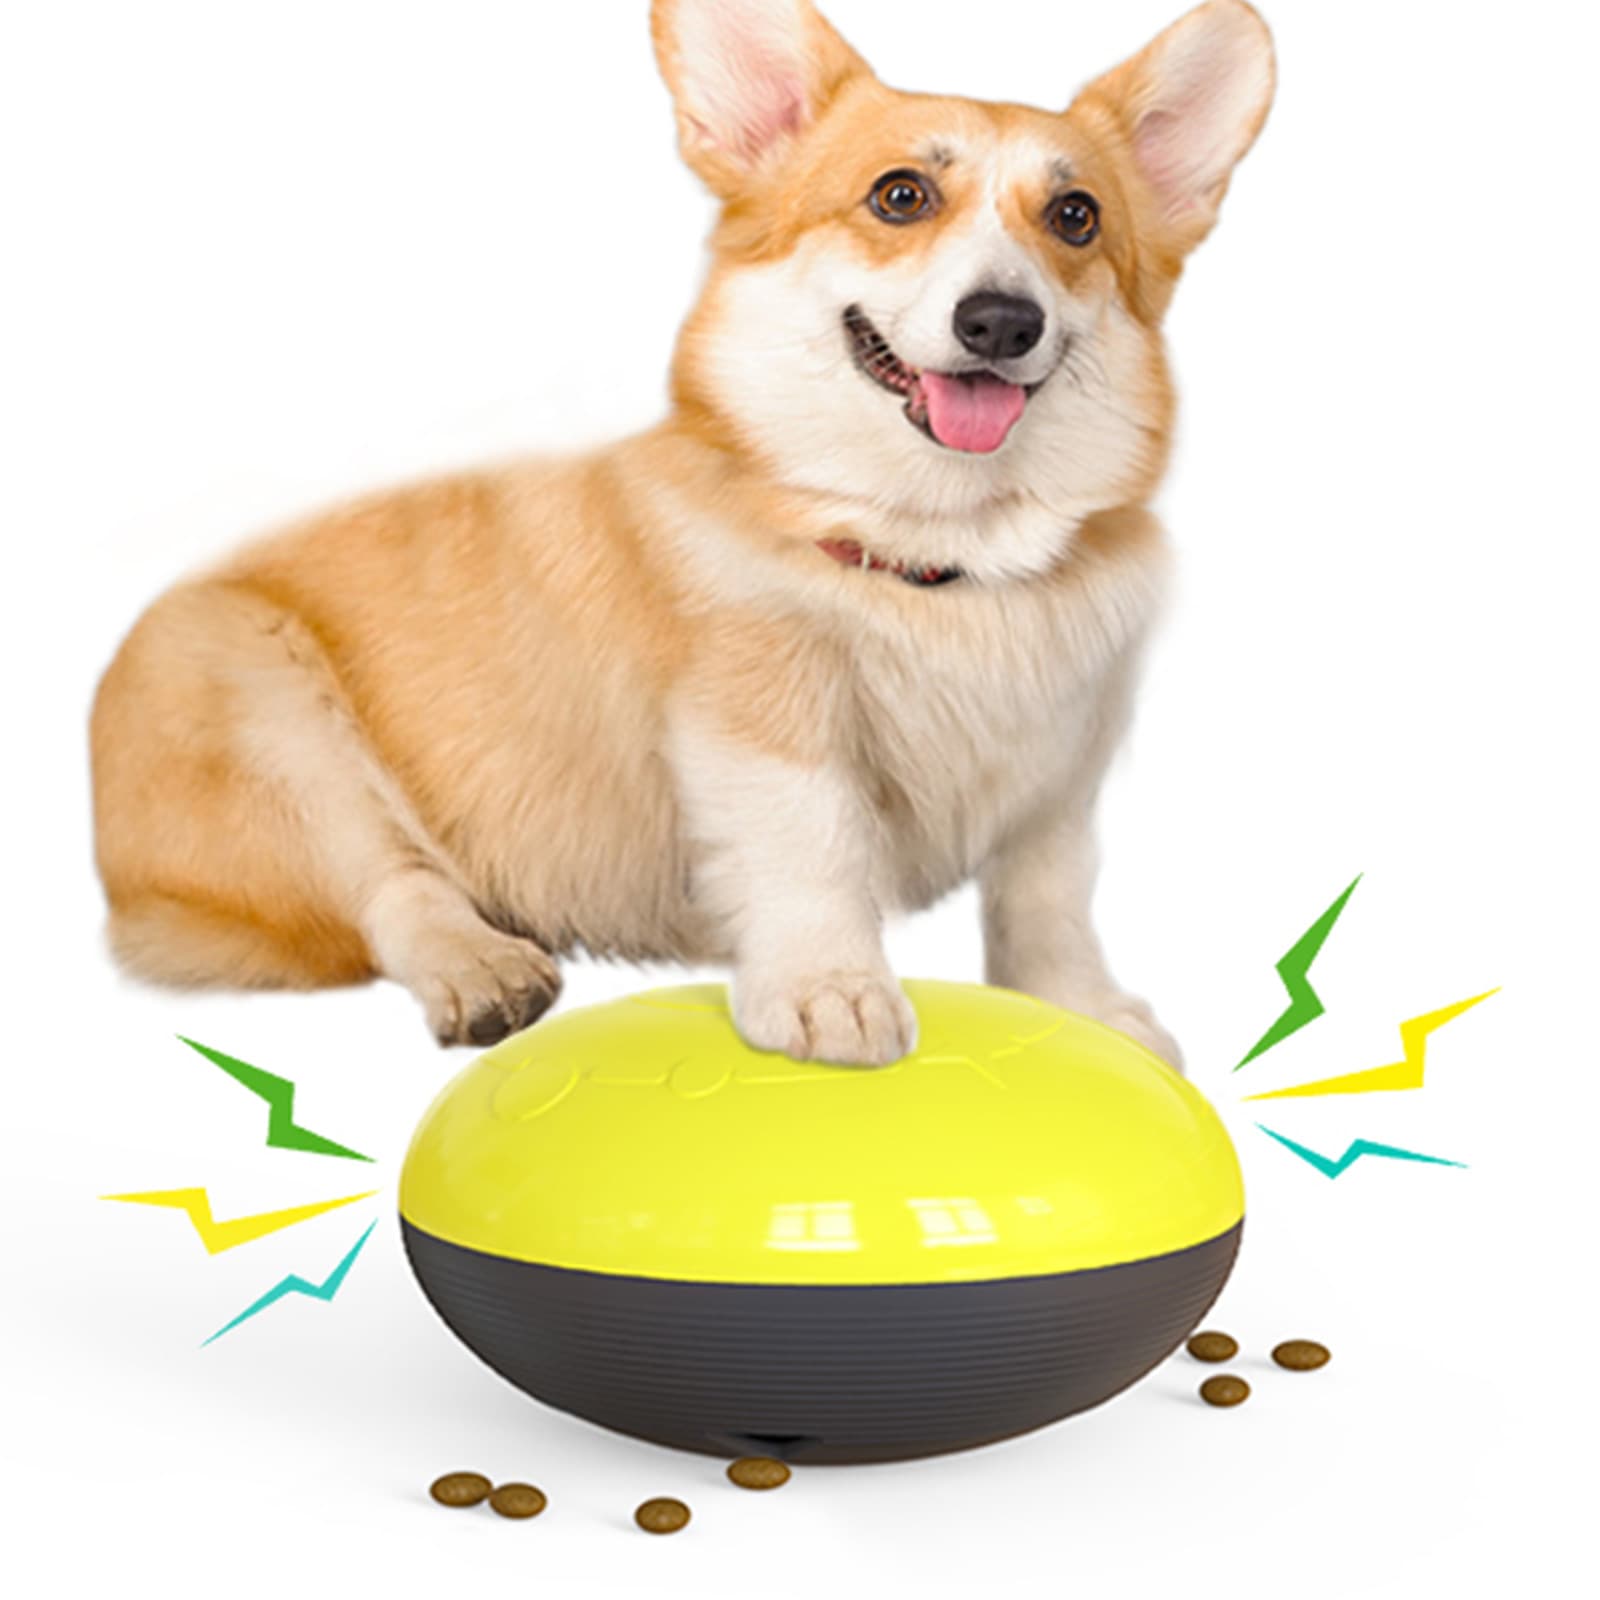 Dog Treat Dispensing Toy Featured Image